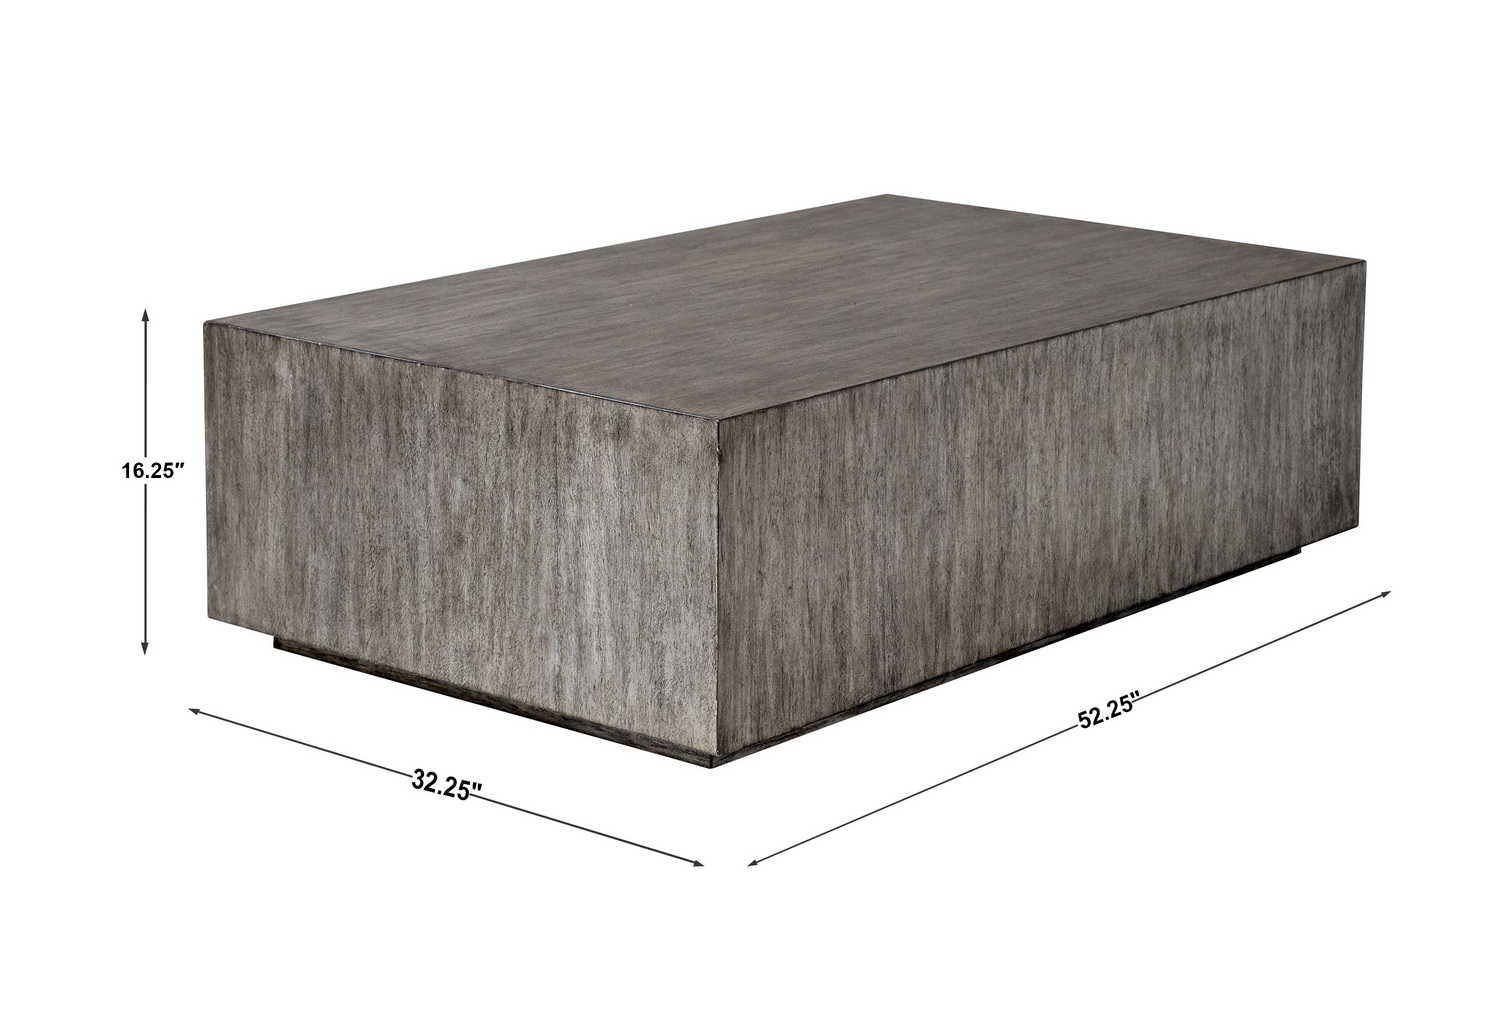 Uttermost Home Motor Freight - Rate to be Quoted Uttermost Kareem Coffee Table